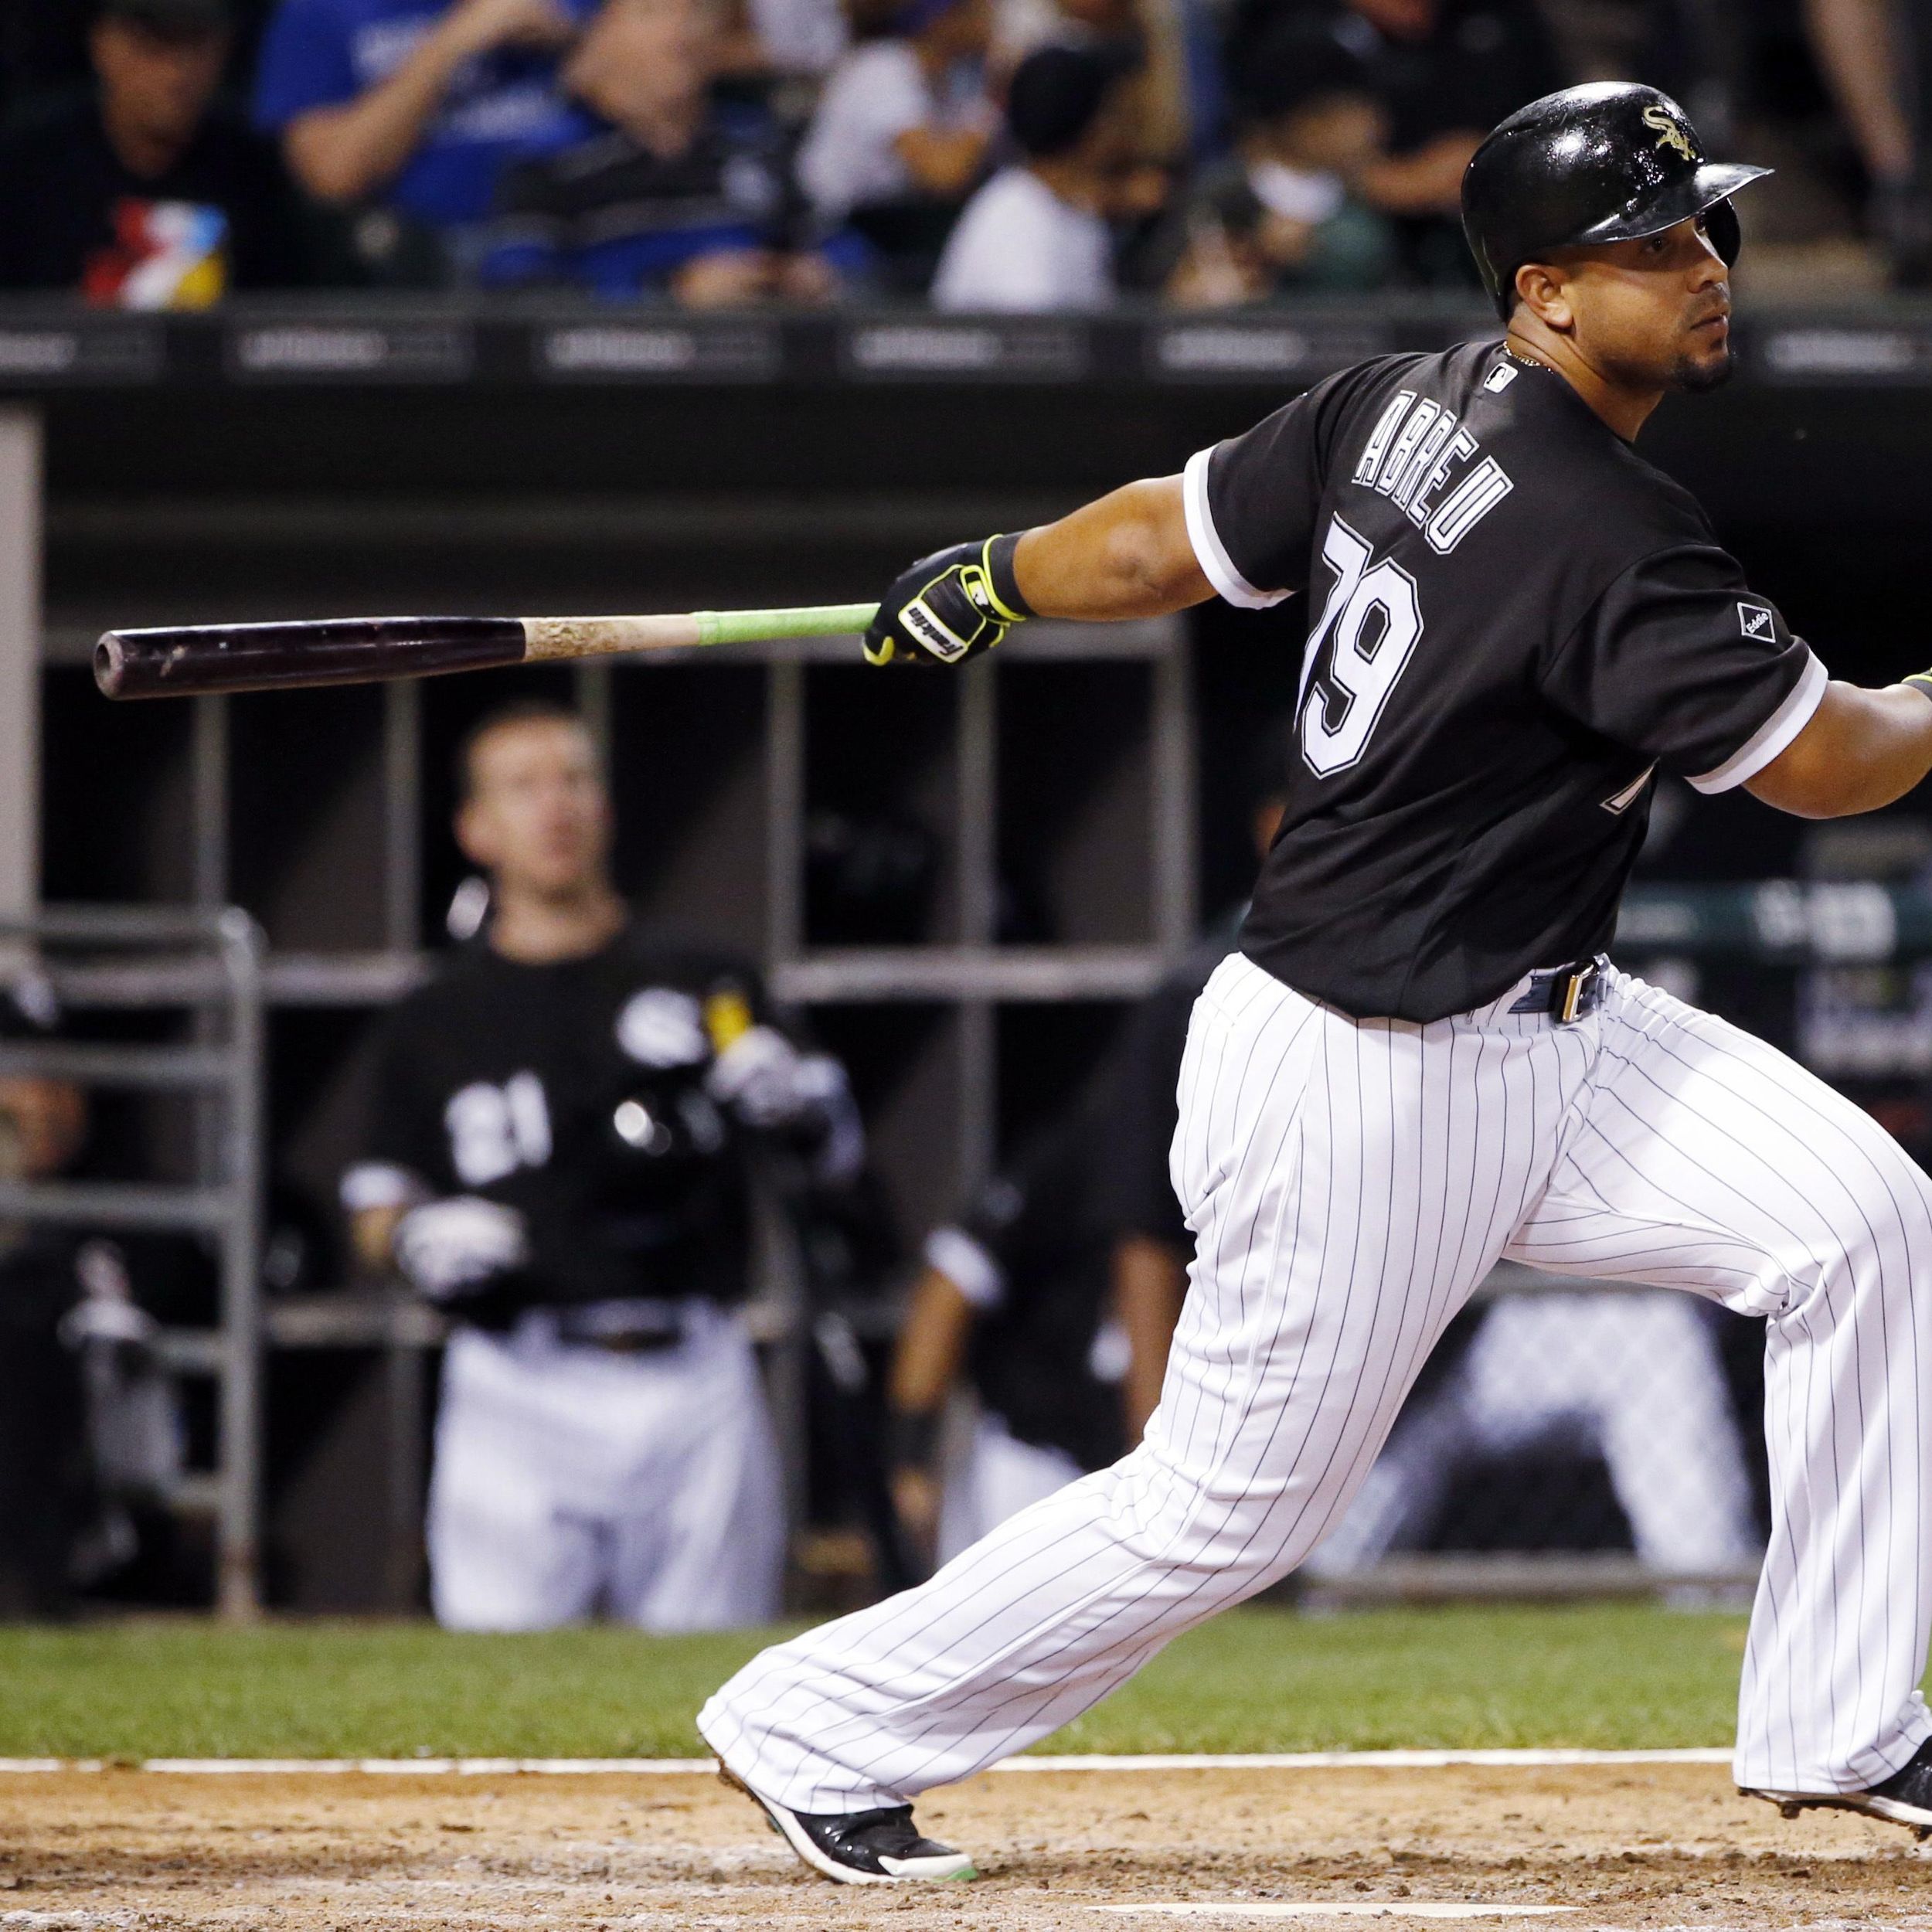 White Sox: Jose Abreu's 2016 Season and Why They Kept Him